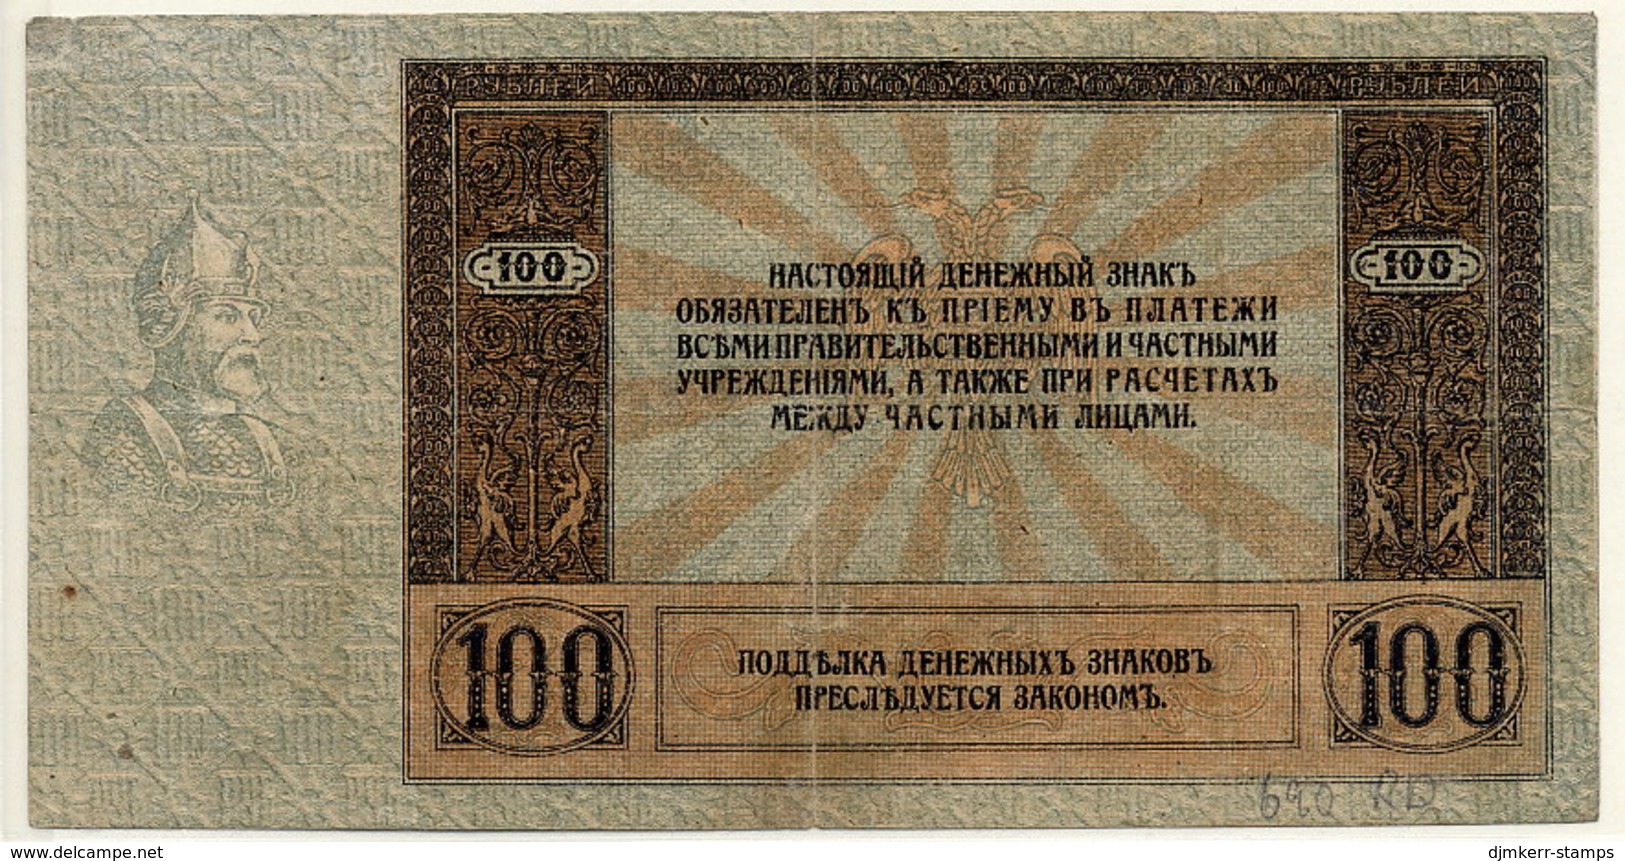 SOUTH RUSSIA 1918  100 Rubles VF  S413 - Rusland